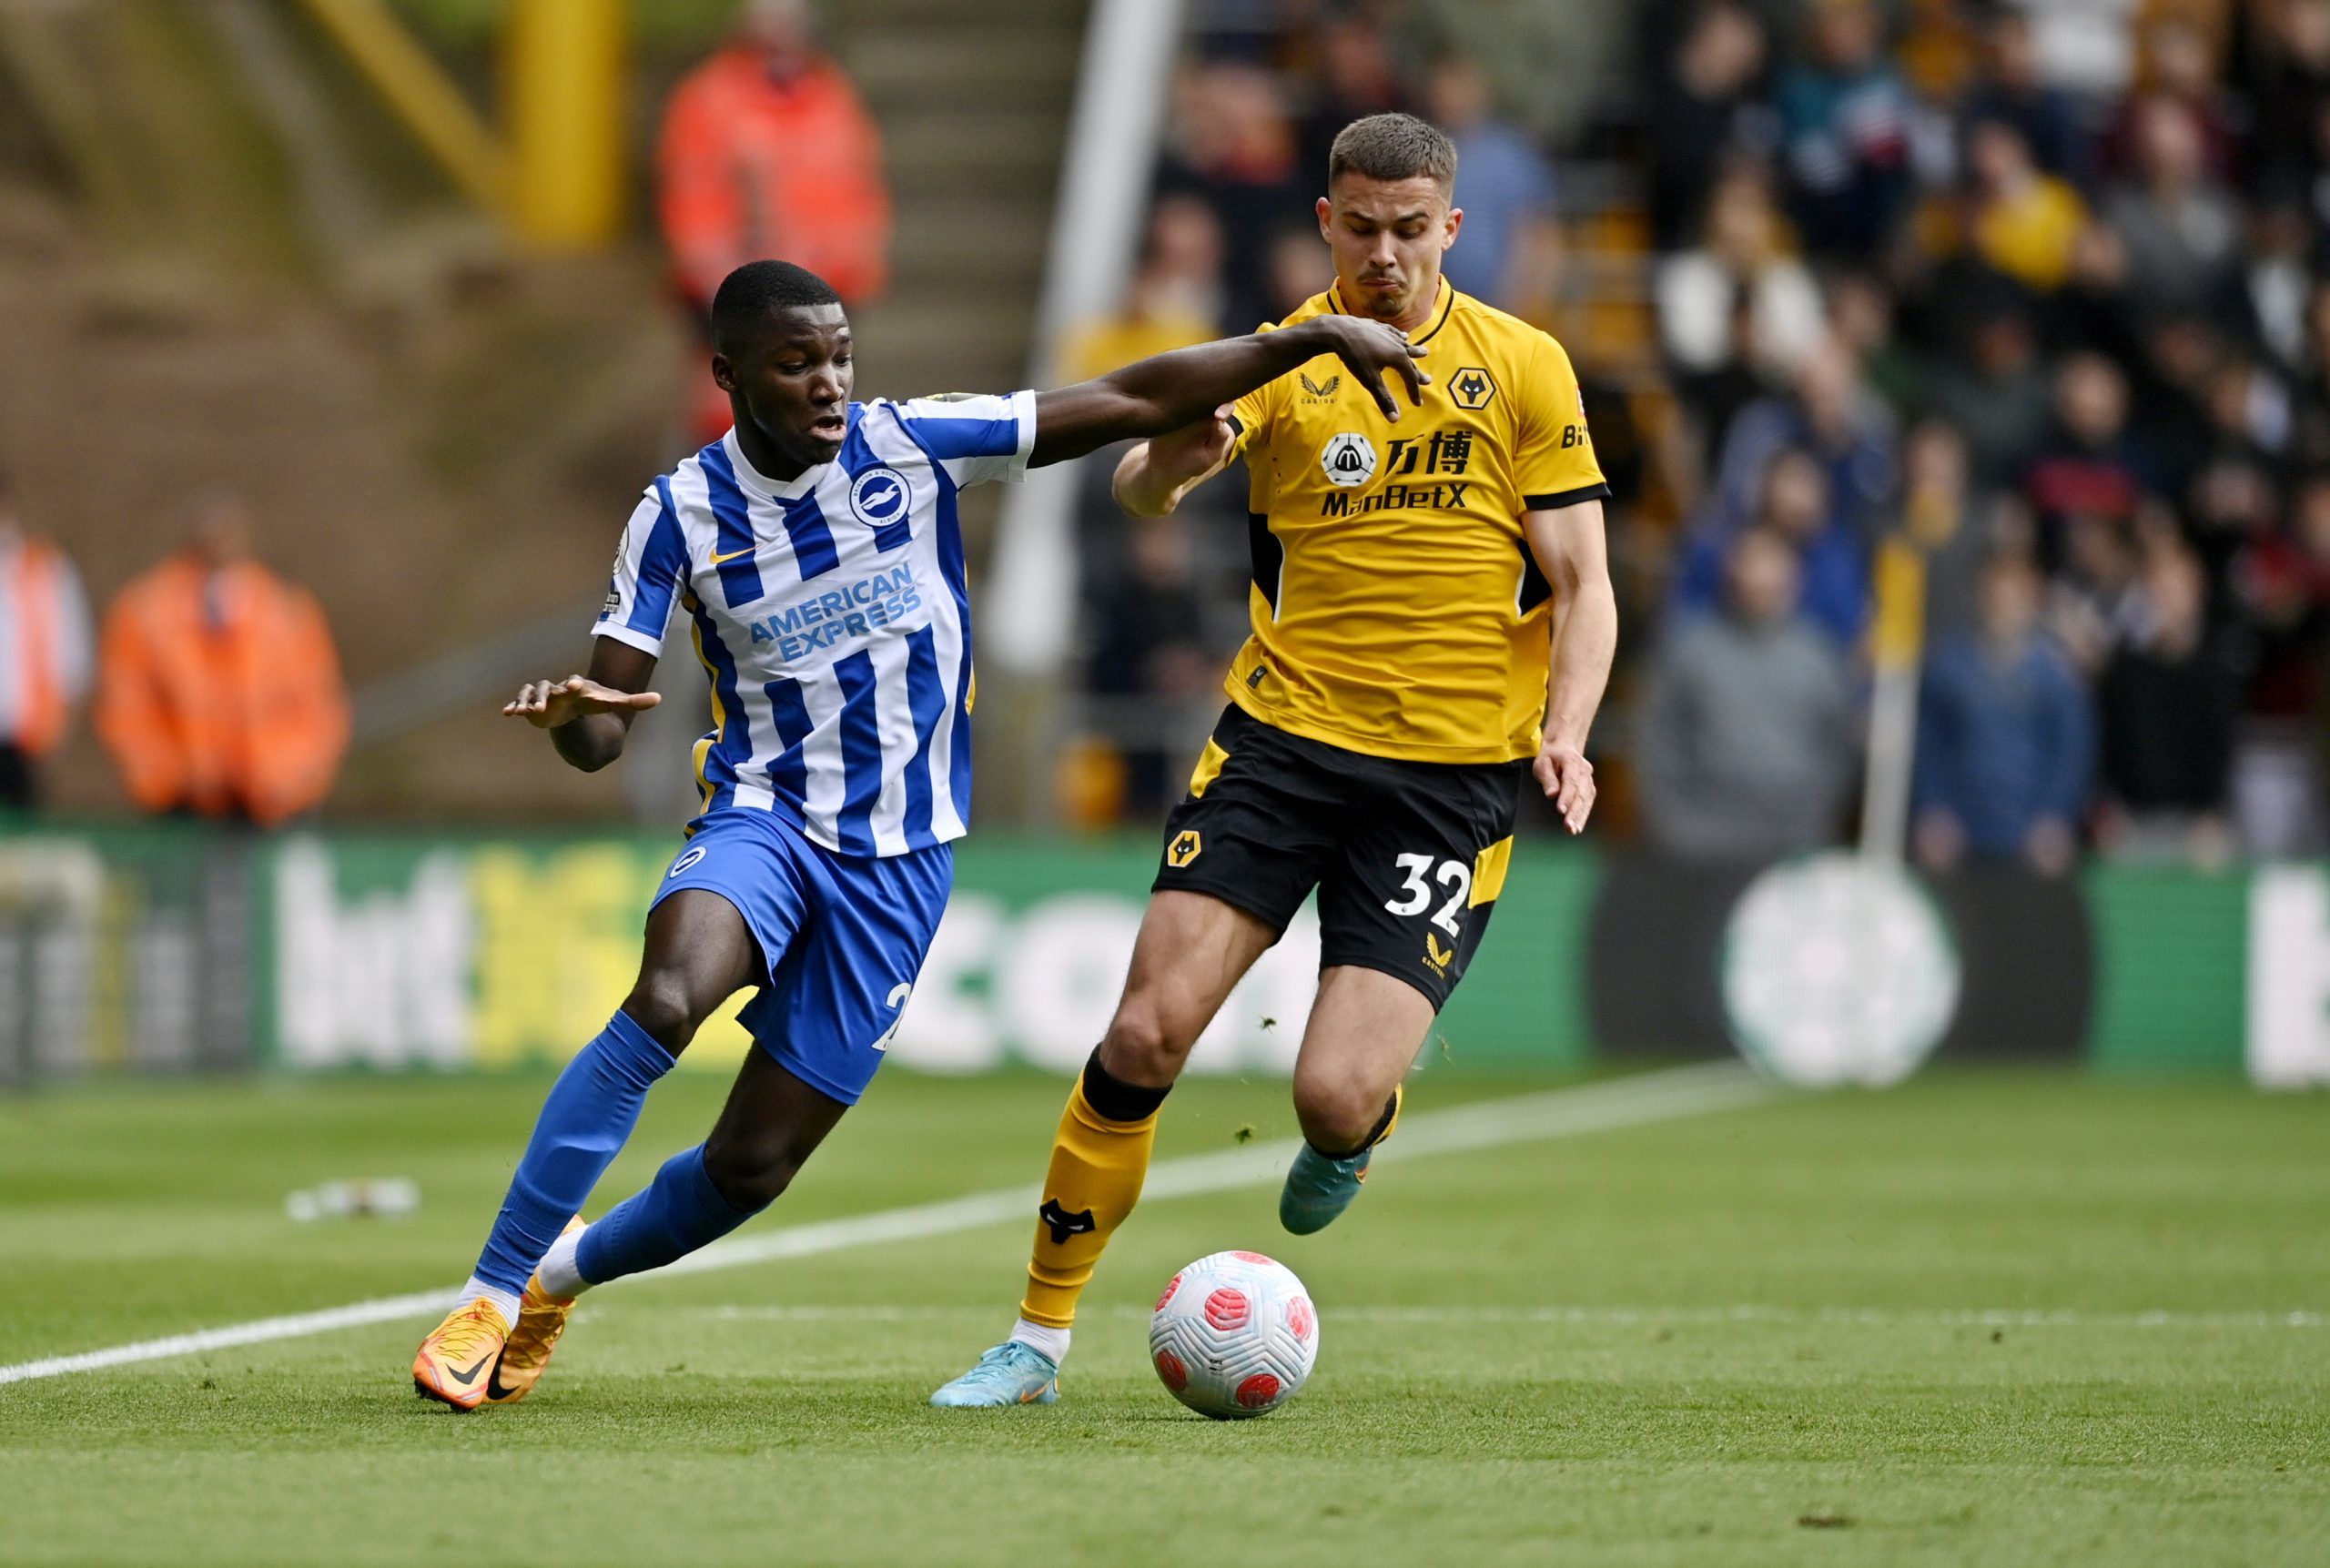 Soccer Football - Premier League - Wolverhampton Wanderers v Brighton &amp; Hove Albion - Molineux Stadium, Wolverhampton, Britain - April 30, 2022 Brighton &amp; Hove Albion's Moises Caicedo in action with Wolverhampton Wanderers' Leander Dendoncker REUTERS/Tony Obrien EDITORIAL USE ONLY. No use with unauthorized audio, video, data, fixture lists, club/league logos or 'live' services. Online in-match use limited to 75 images, no video emulation. No use in betting, games or single club /league/p